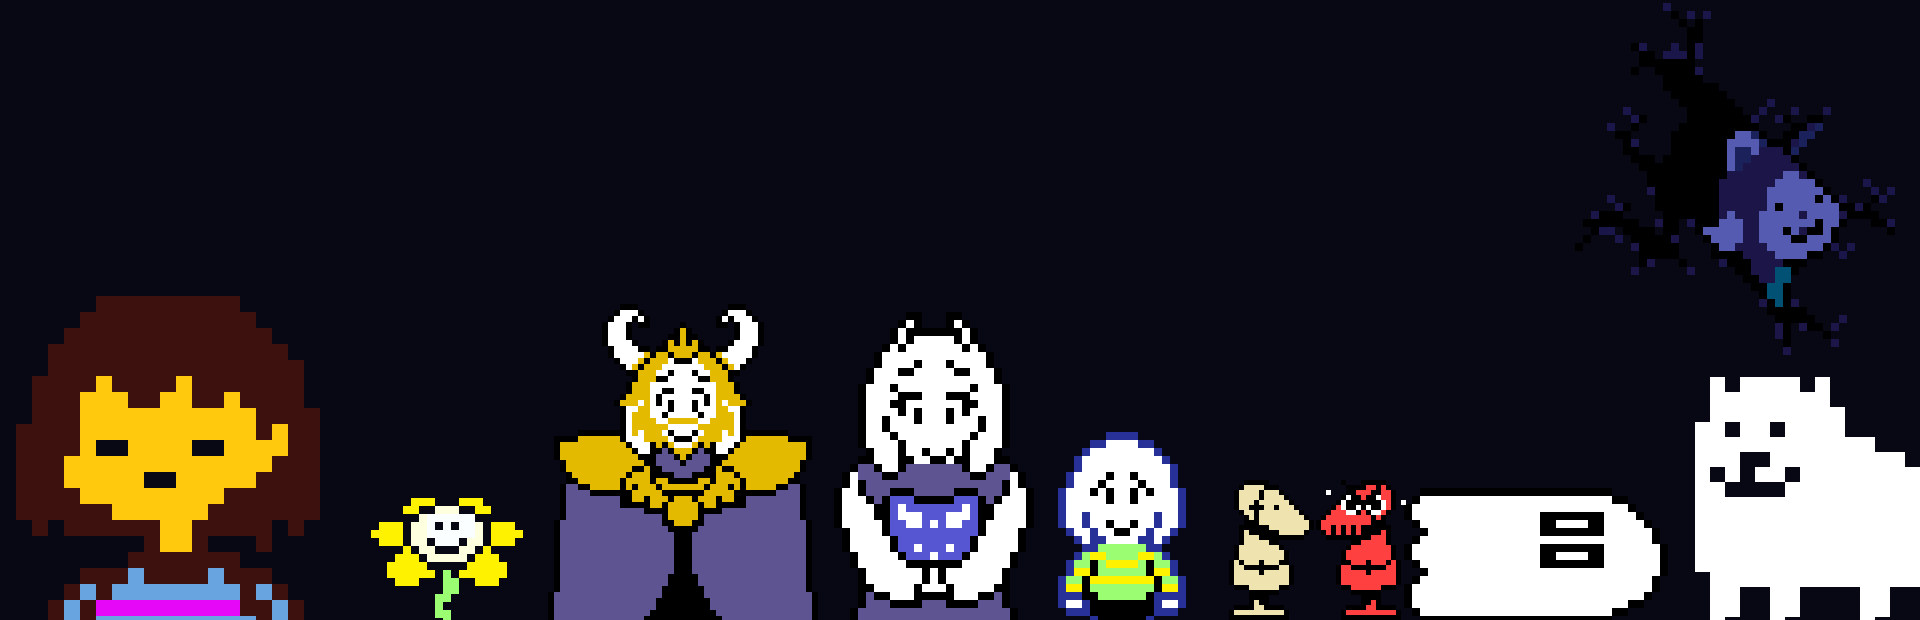 Undertale Steam Grid Icon by TheRealSneakman on DeviantArt